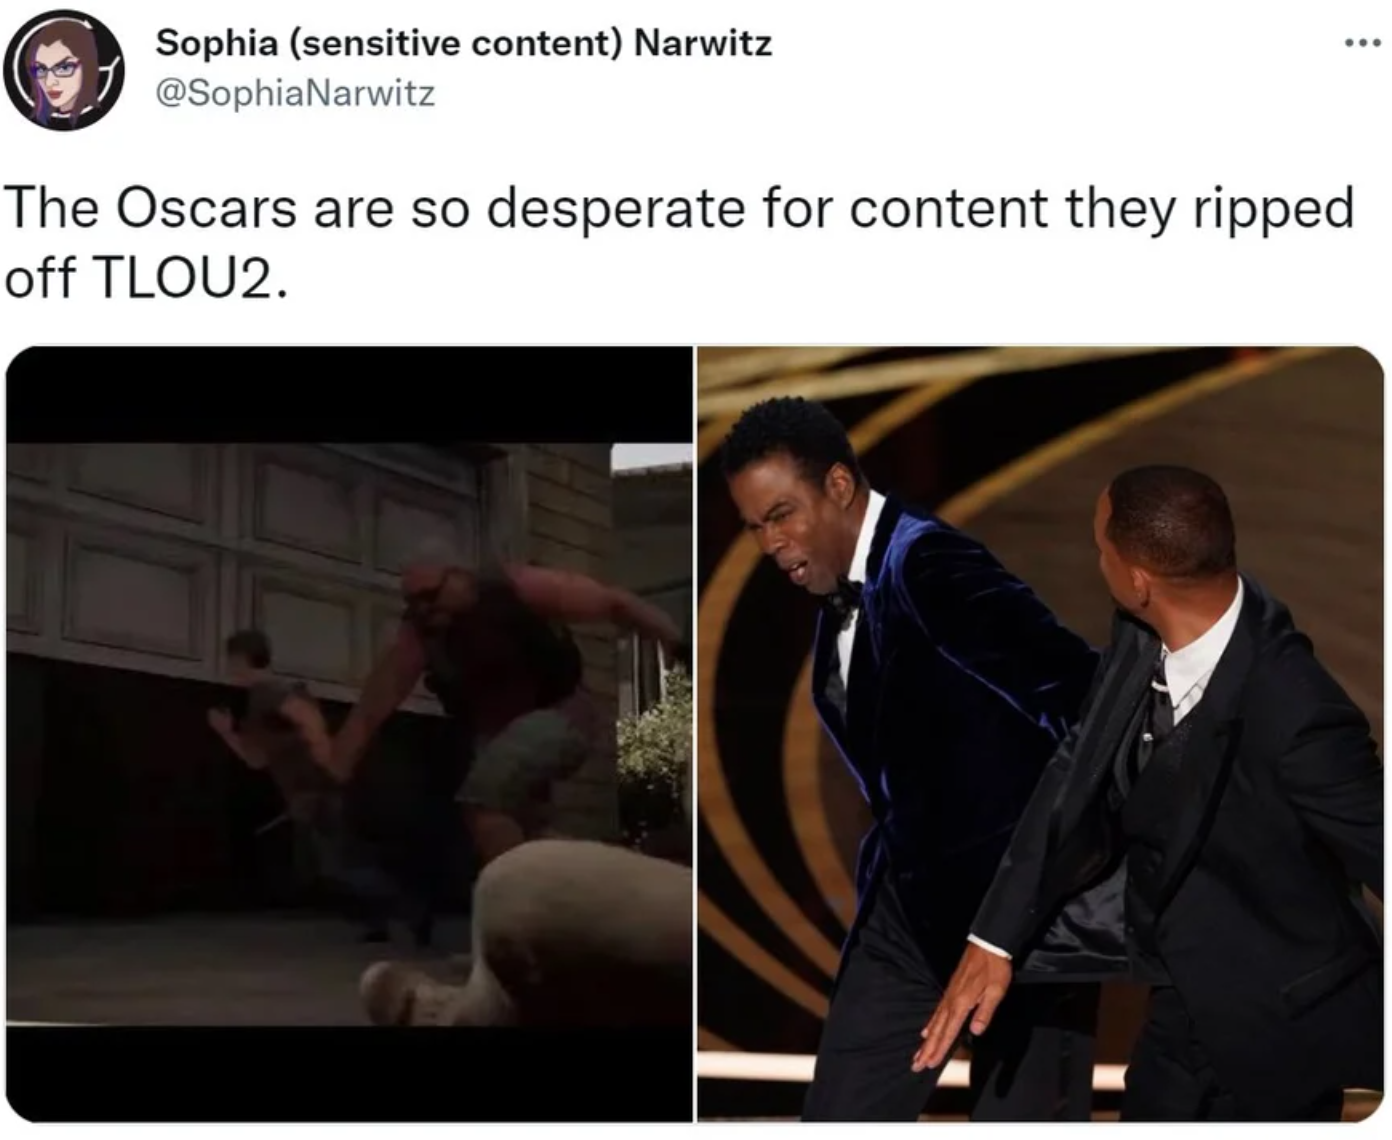 funny gaming memes - Academy Awards - Sophia sensitive content Narwitz The Oscars are so desperate for content they ripped off TLOU2.